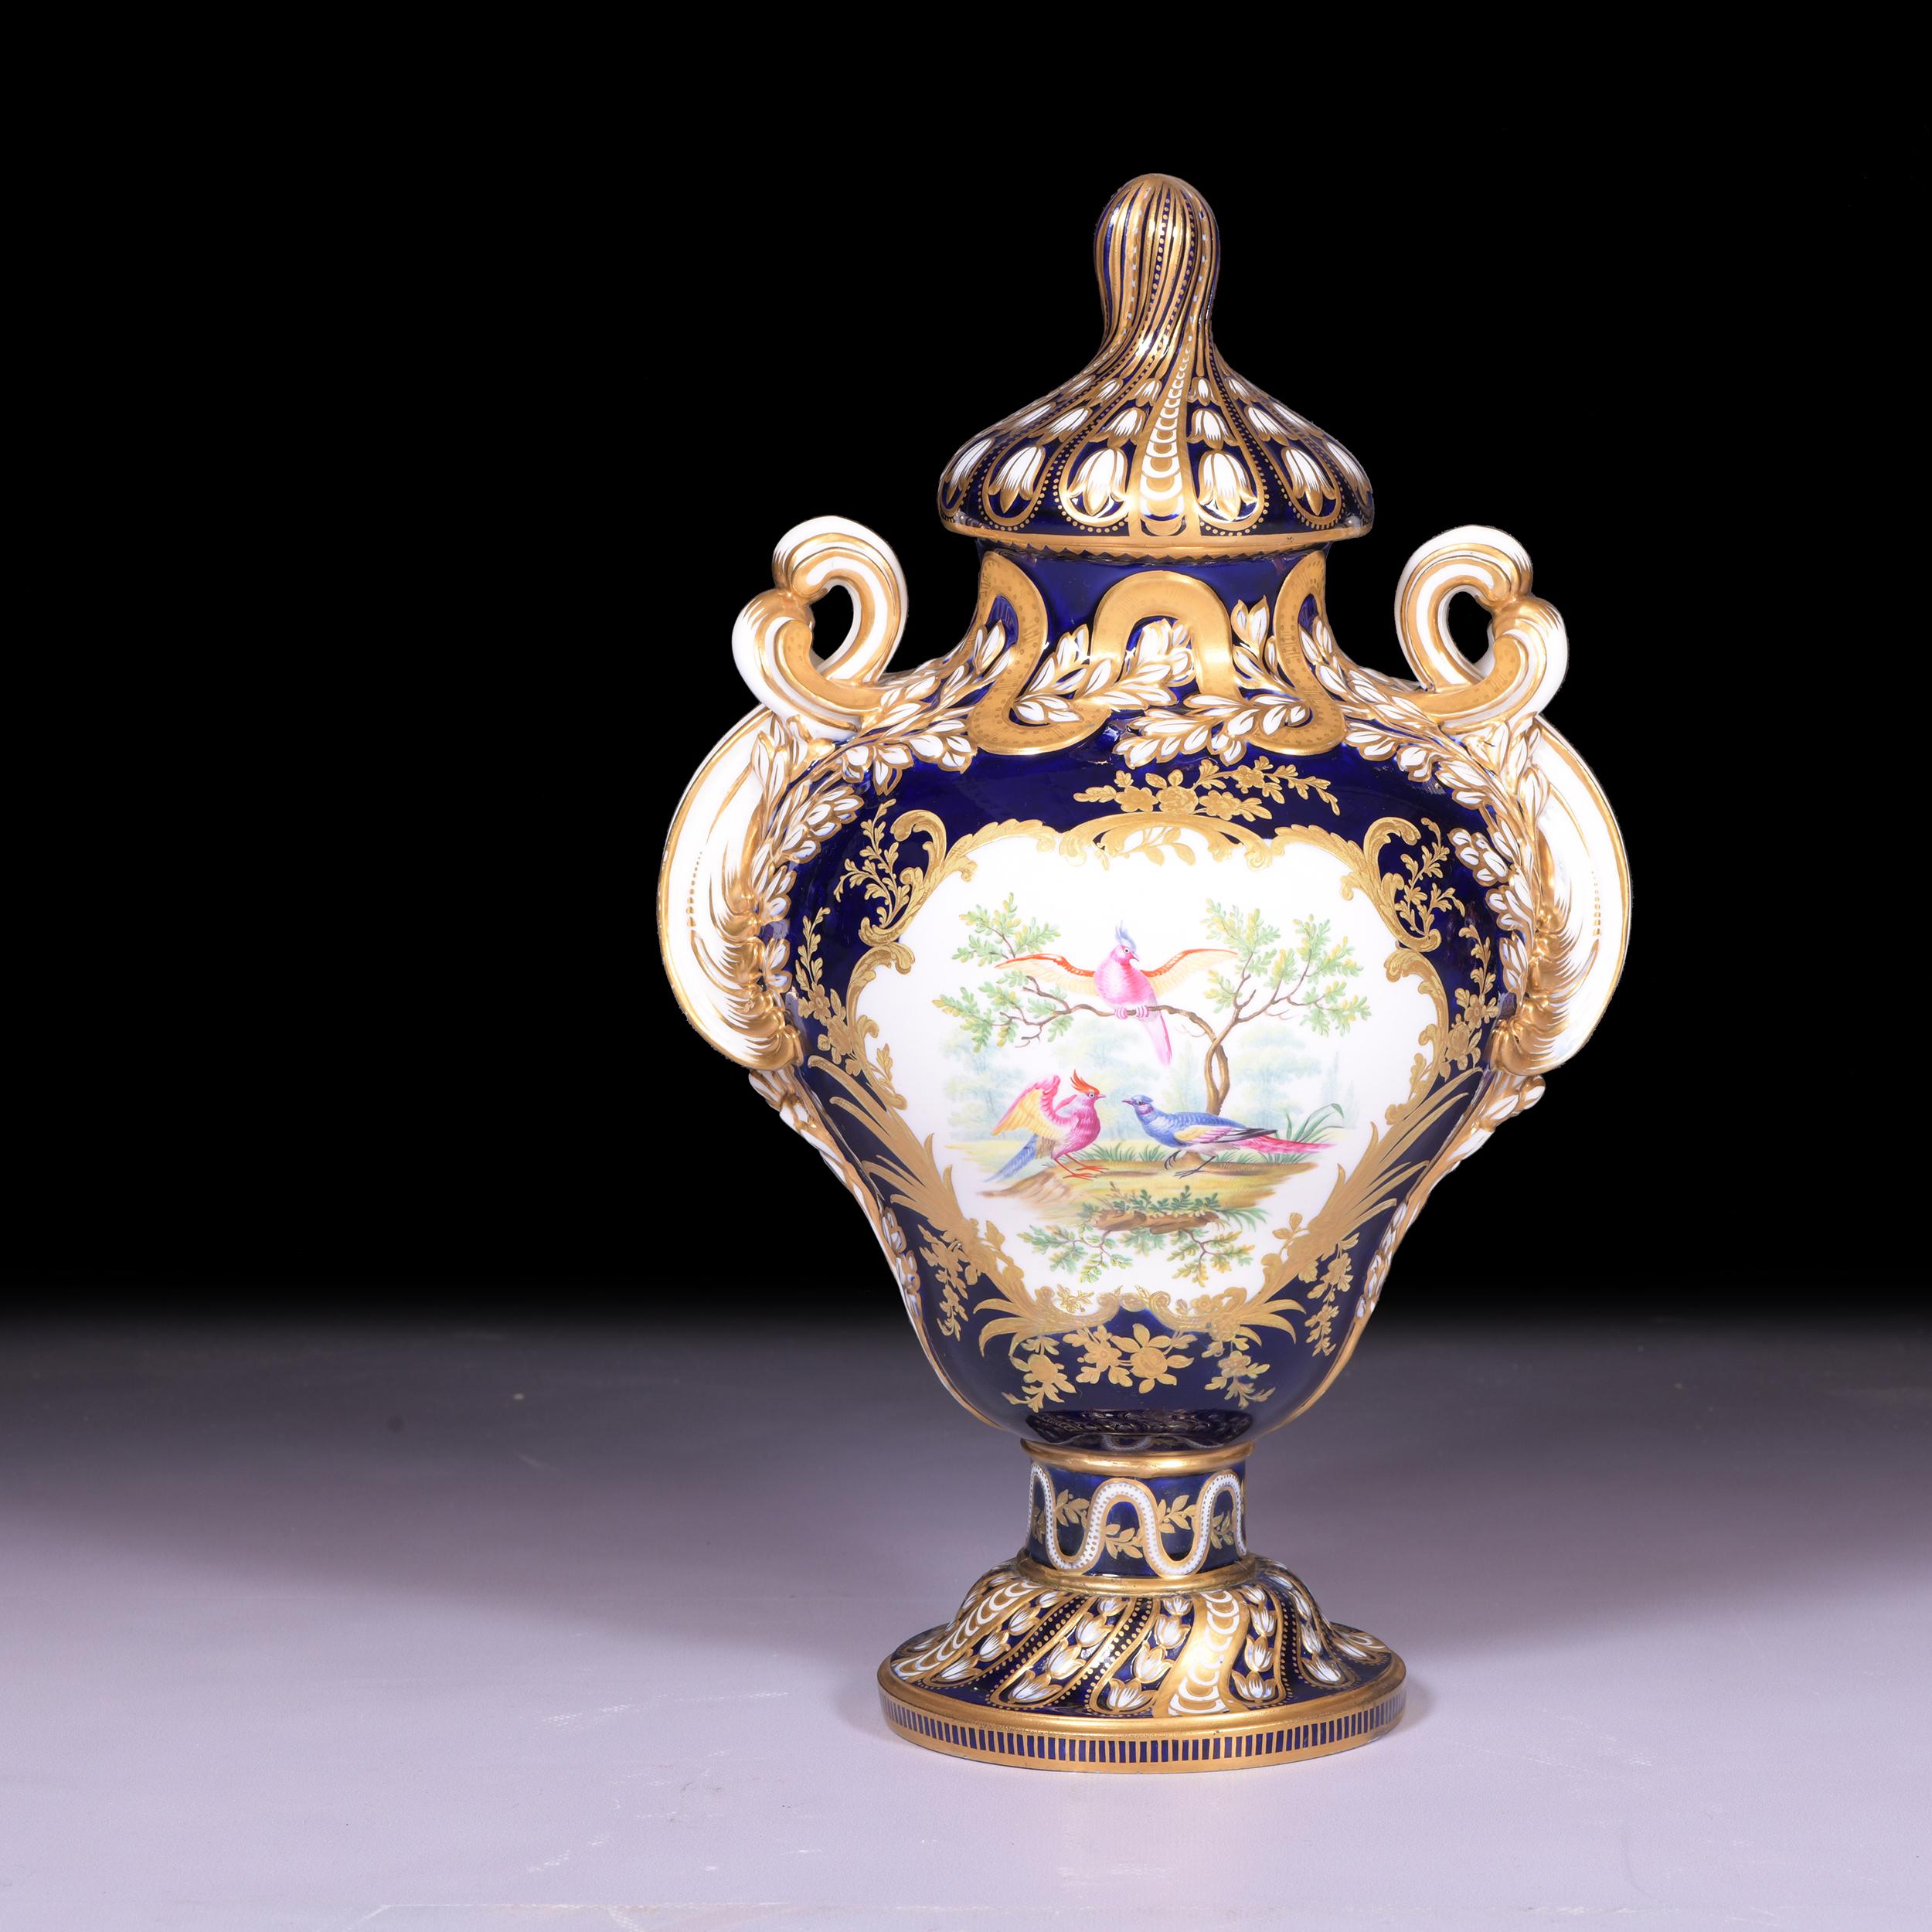 Hand-Painted 19th Century English Exhibition Porcelain Vase by Minton Painted by Martin Sneed For Sale